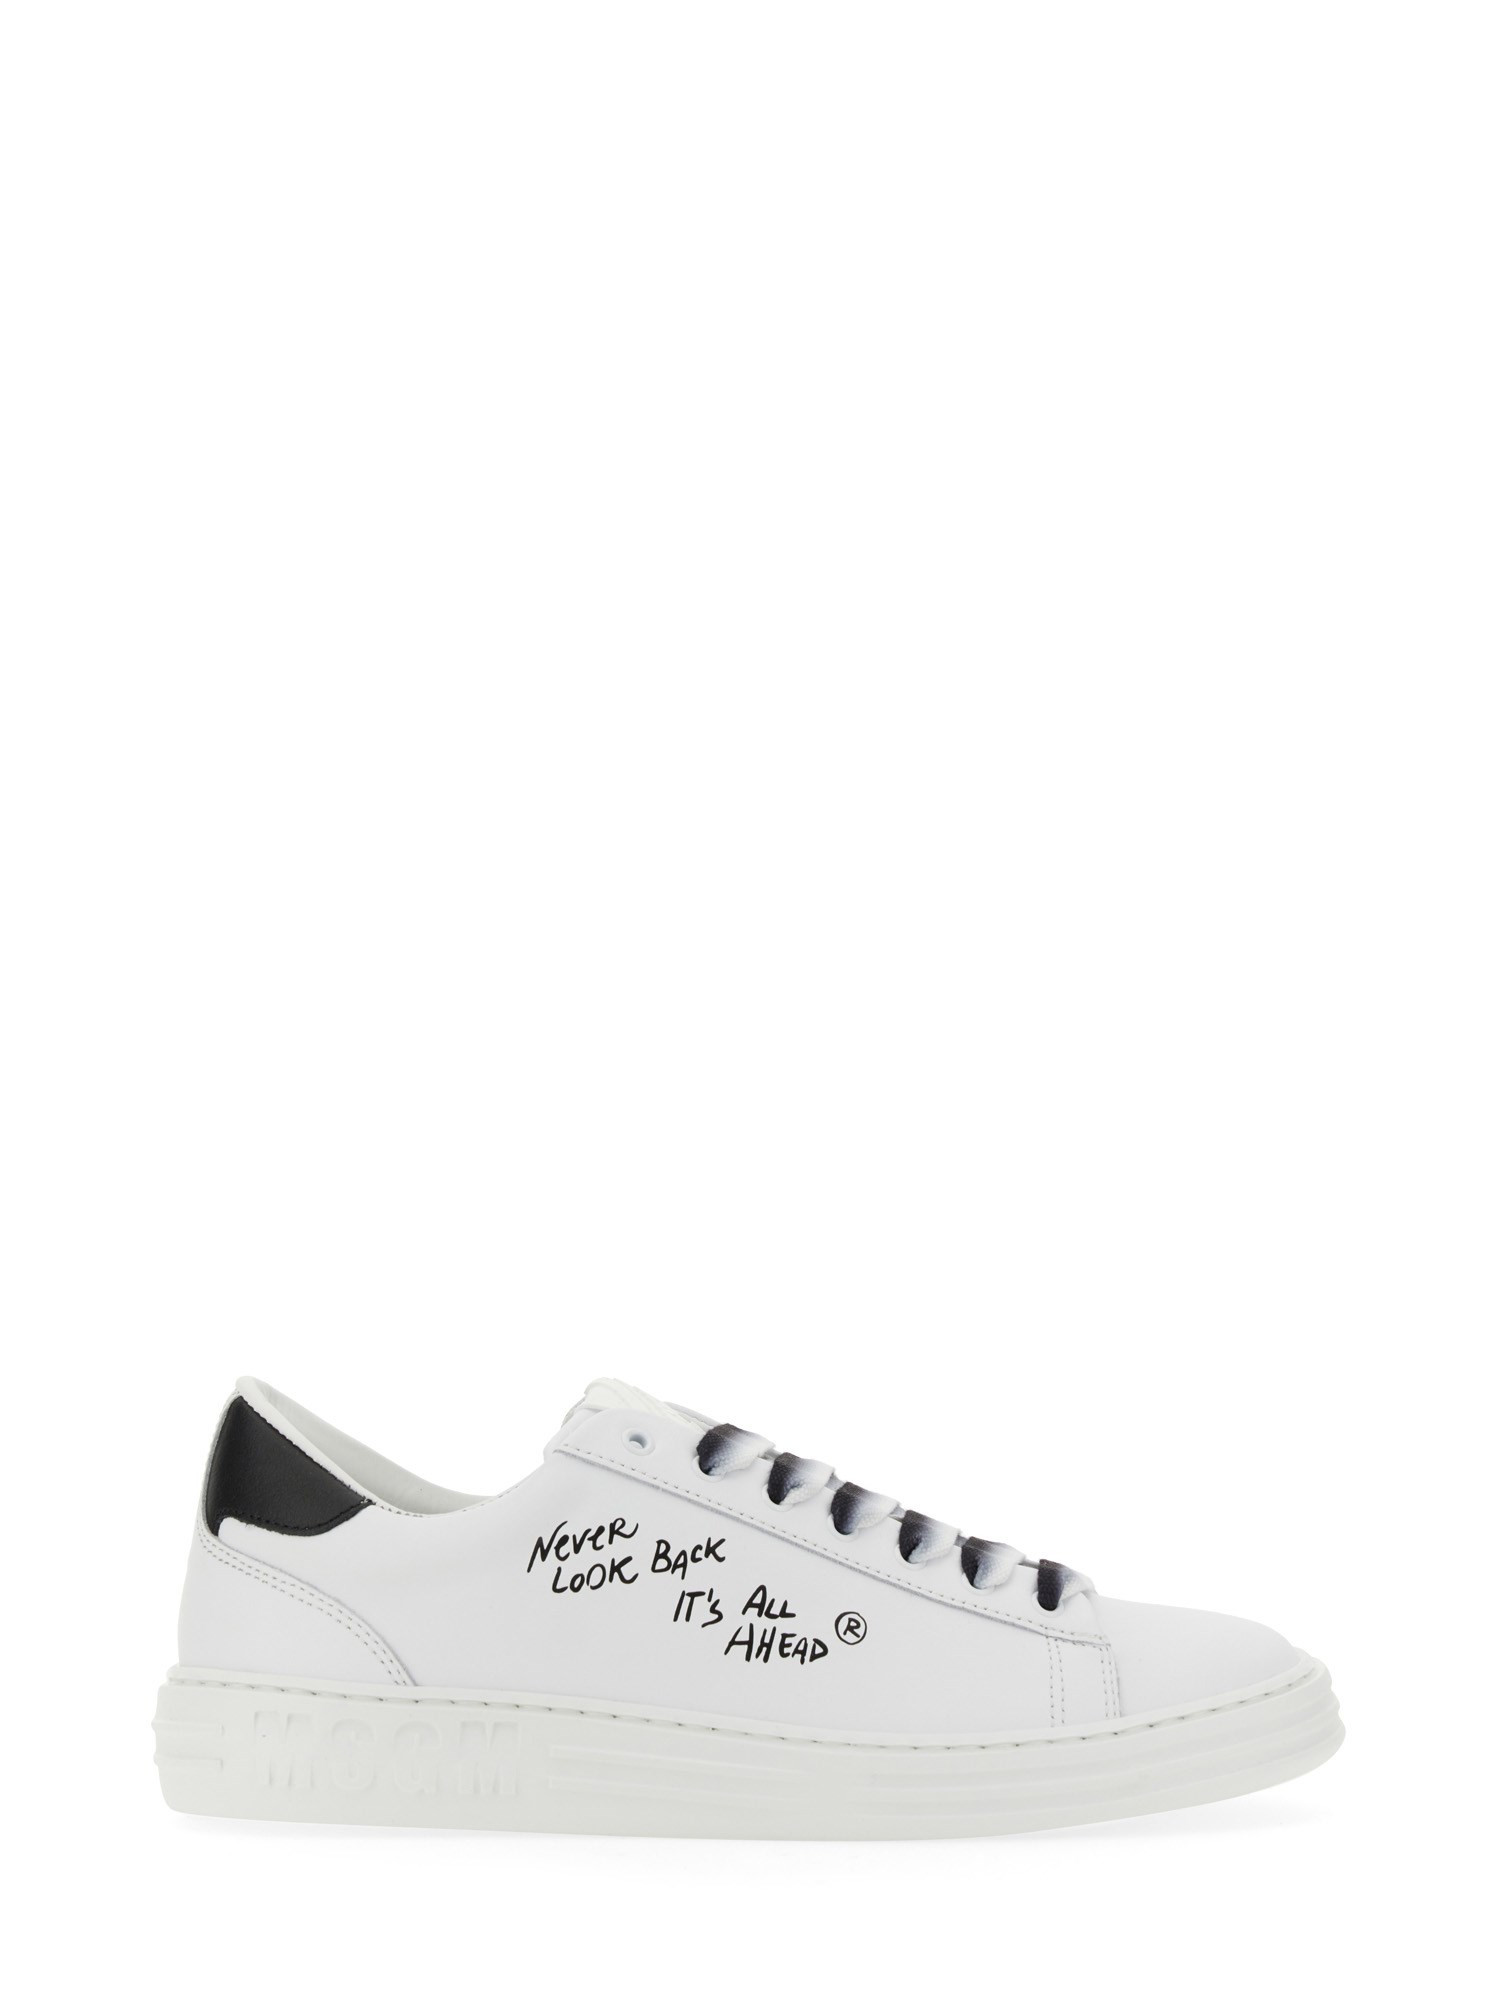 msgm leather sneaker